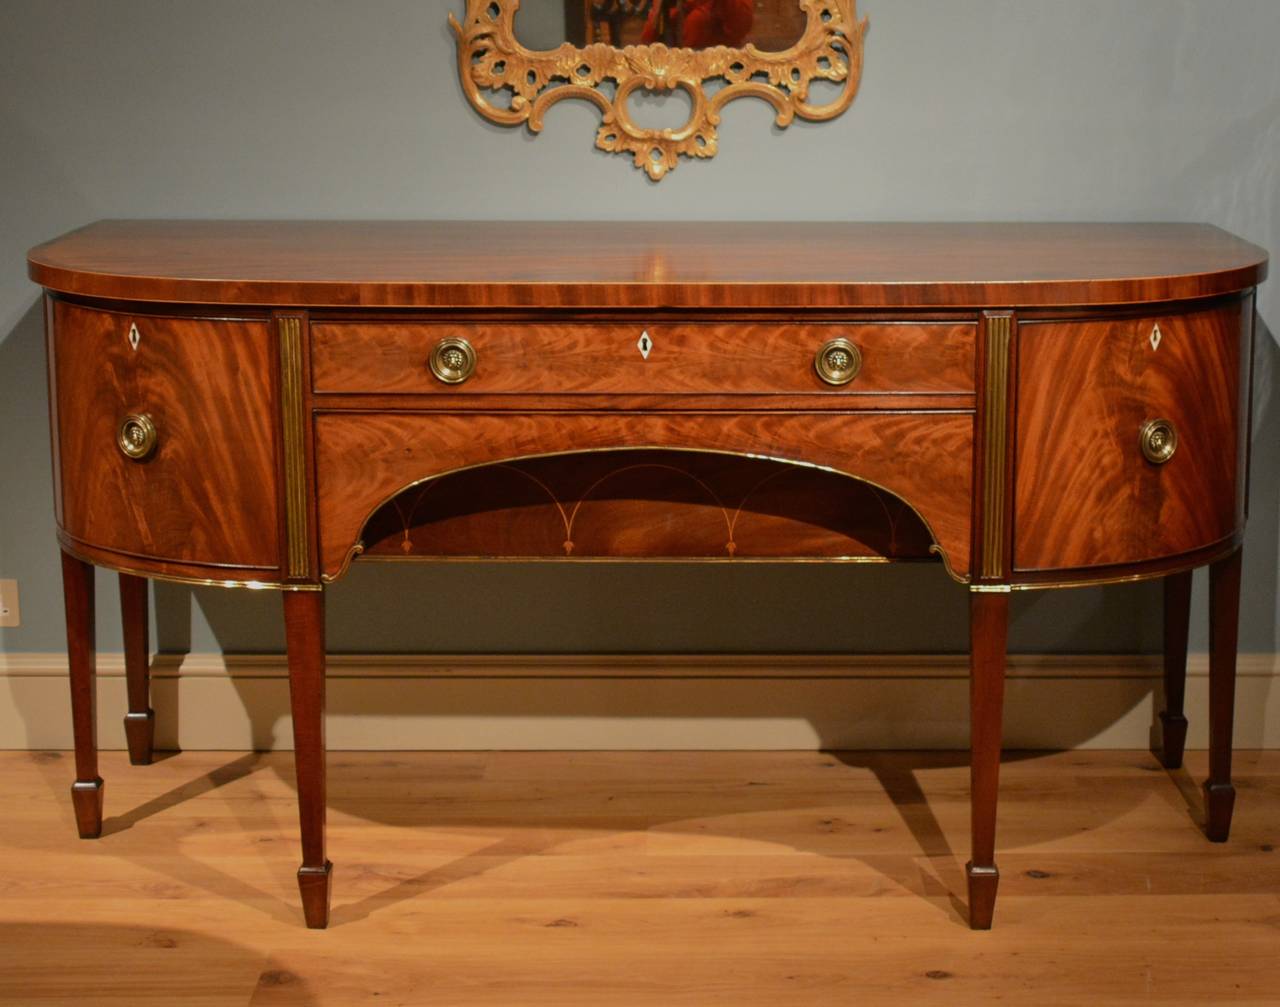 A high quality George III mahogany sideboard, the cross banded 'D-shaped' top over one deep cellarette drawer, a central long drawer and an opening cupboard, the whole finely veneered with the rare feature of added brass enrichments, standing on